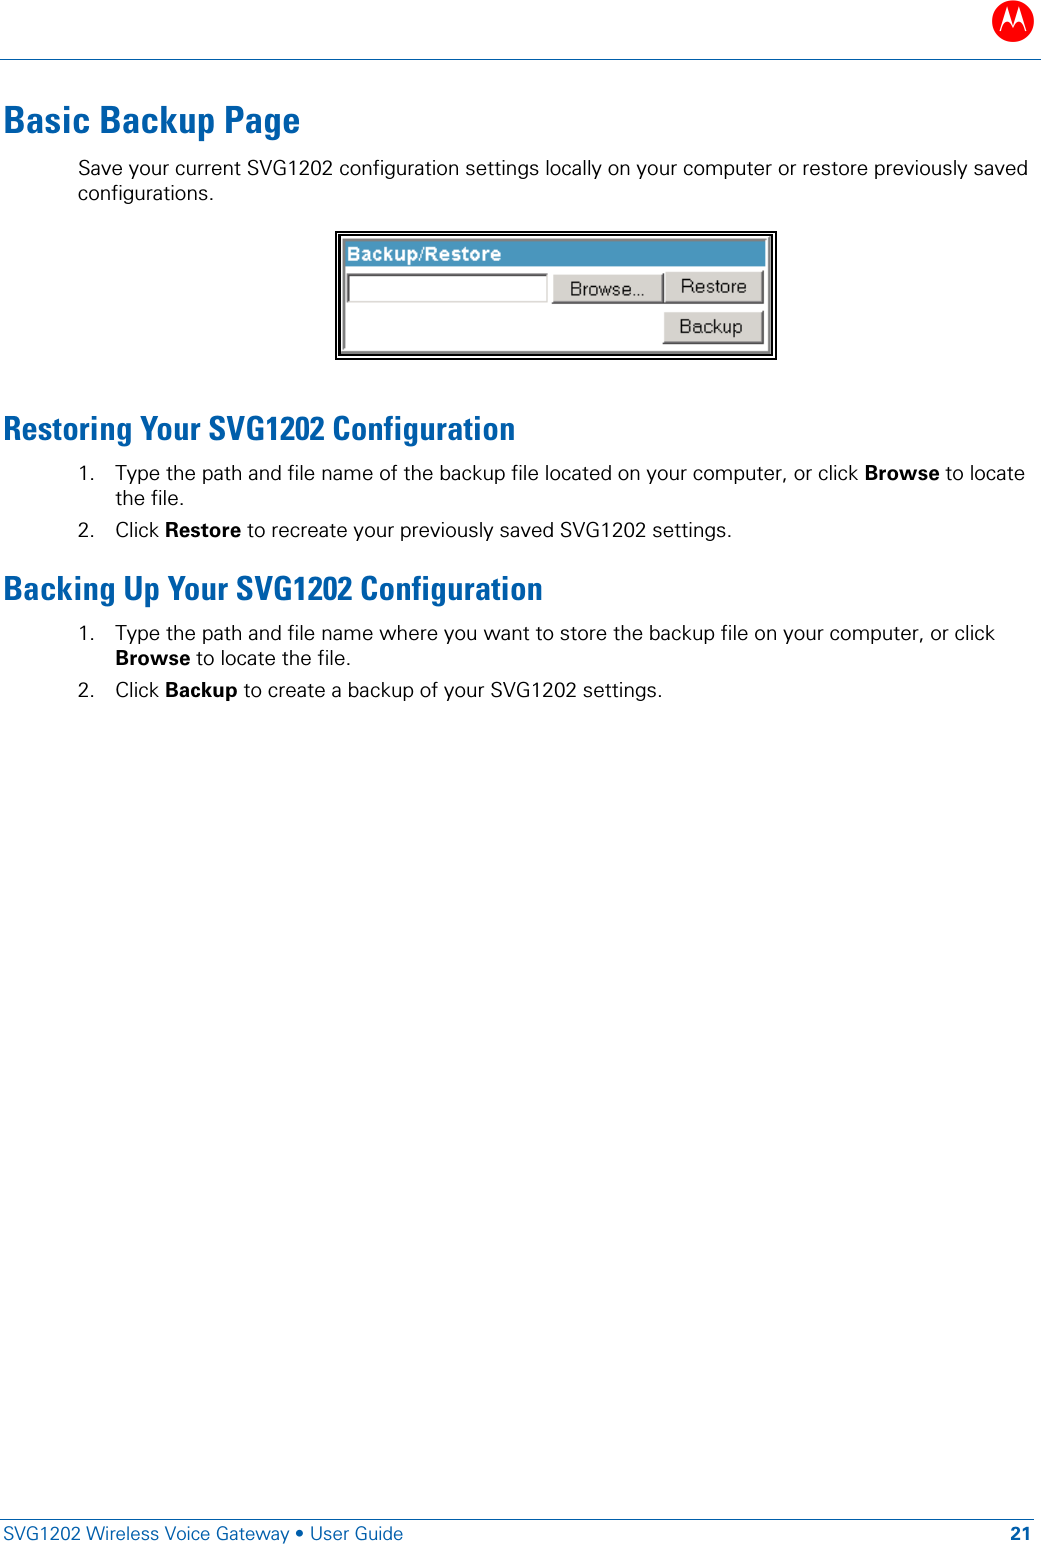 B   SVG1202 Wireless Voice Gateway • User Guide 21  Basic Backup Page Save your current SVG1202 configuration settings locally on your computer or restore previously saved configurations.   Restoring Your SVG1202 Configuration 1. Type the path and file name of the backup file located on your computer, or click Browse to locate the file. 2. Click Restore to recreate your previously saved SVG1202 settings. Backing Up Your SVG1202 Configuration 1. Type the path and file name where you want to store the backup file on your computer, or click Browse to locate the file. 2. Click Backup to create a backup of your SVG1202 settings.  